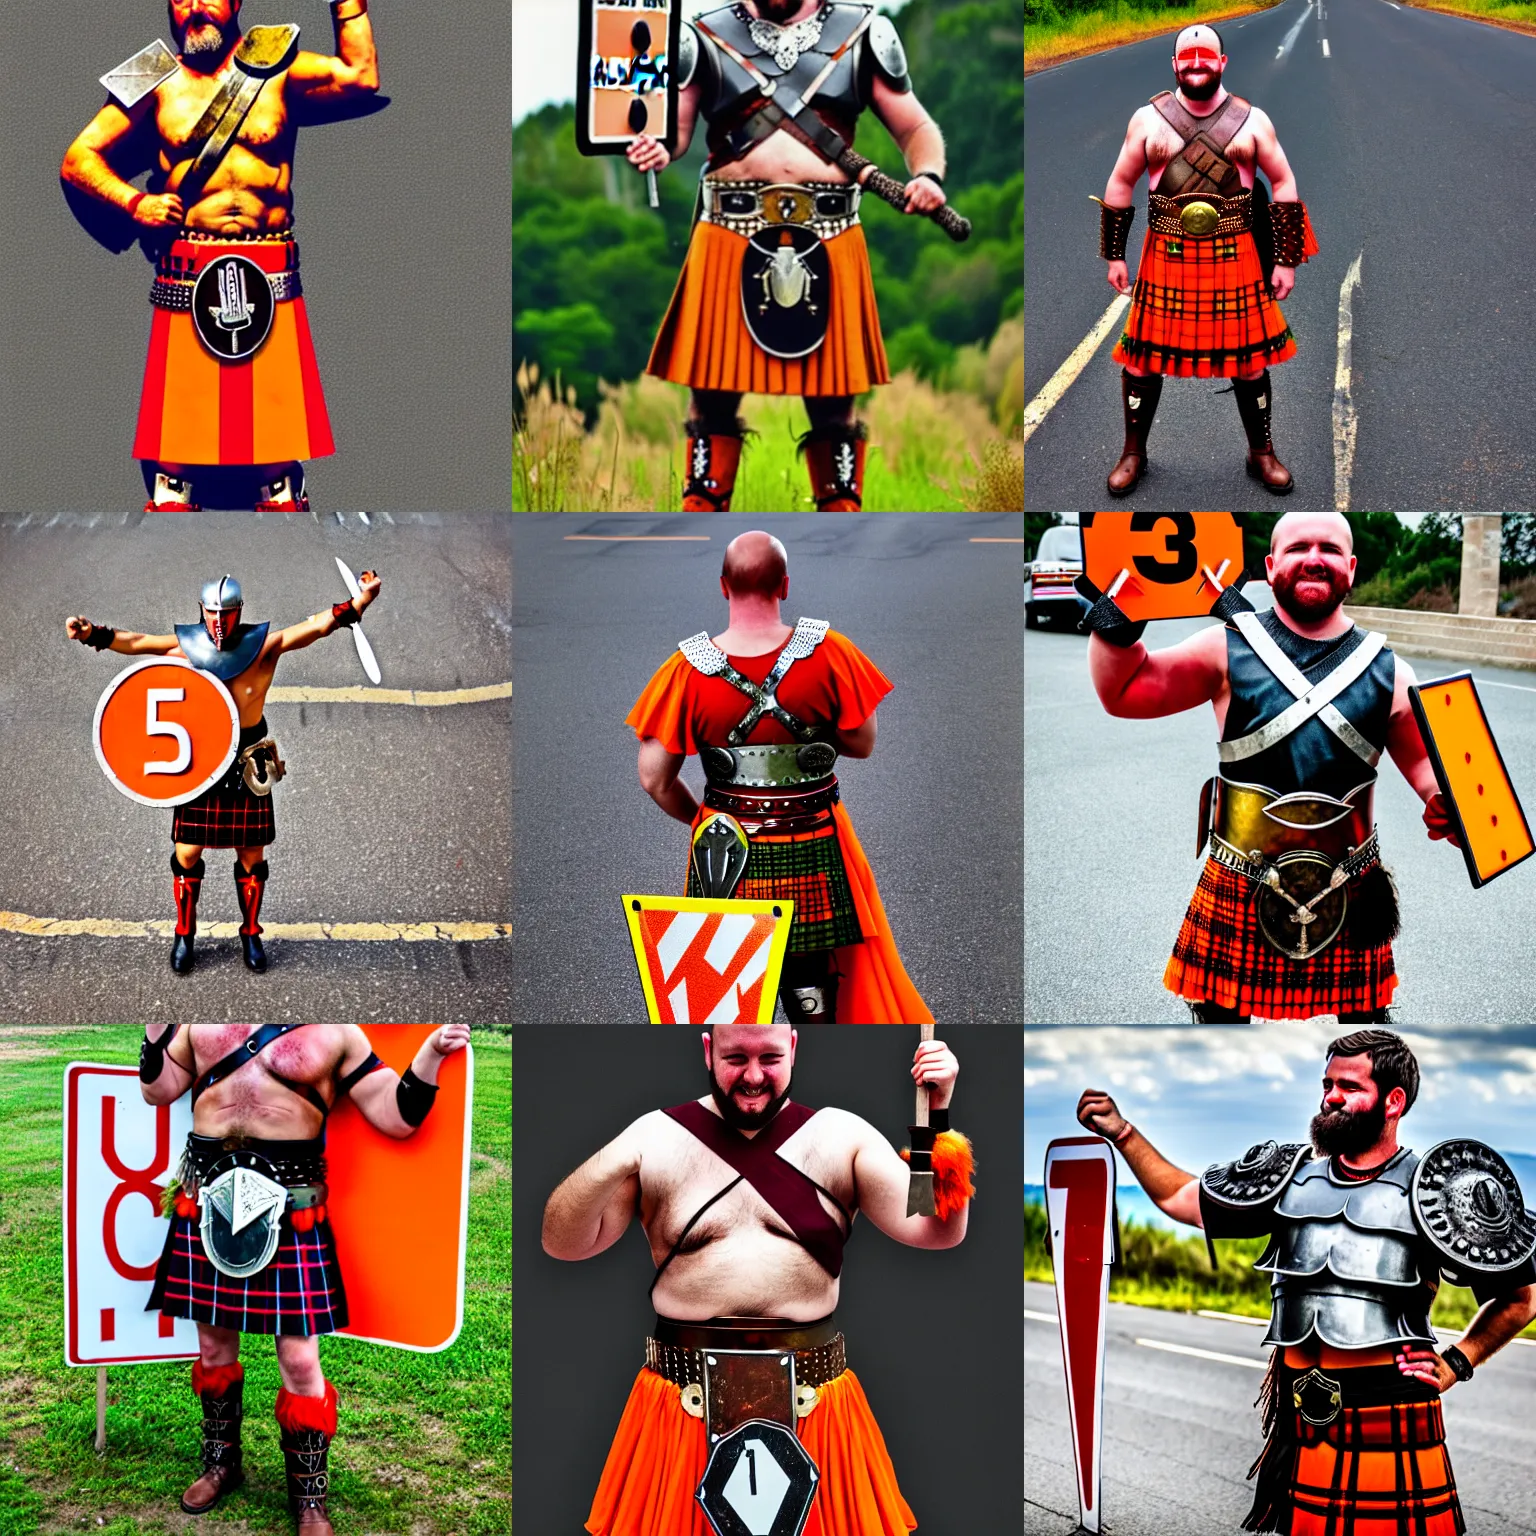 Prompt: gladiator wearing a road sign on his kilt, red and orange road sign armor